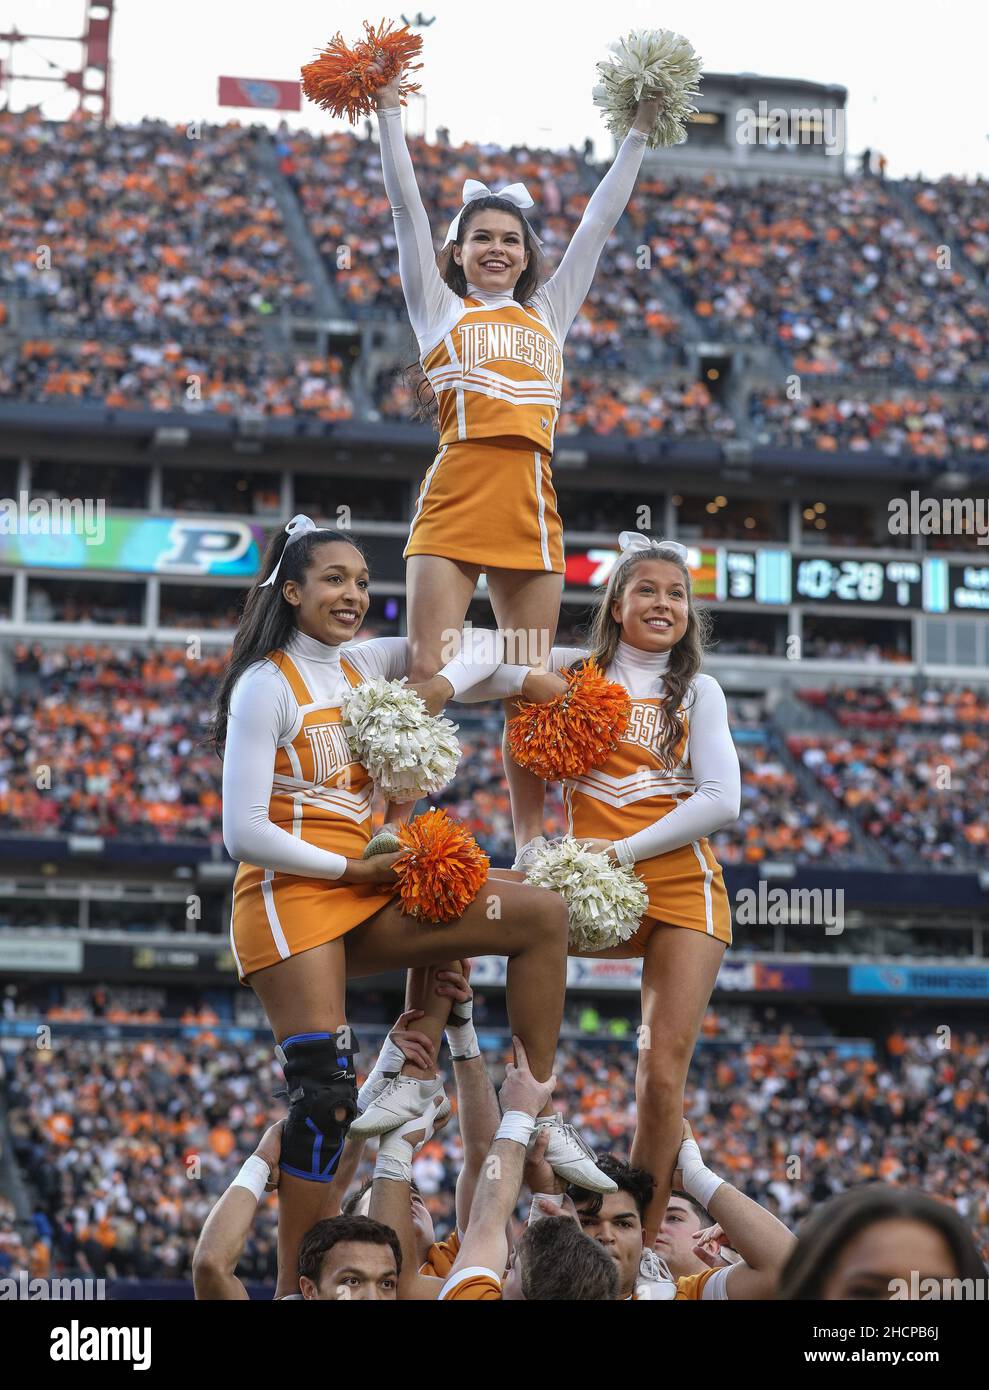 Nashville, TN, USA. 30th Dec, 2021. The Tennessee cheerleaders build a human pyramid during the TransPerfect Music City Bowl football game between the Purdue Boilermakers and the Tennessee Volunteeers at Nissan Stadium in Nashville, TN. Kyle Okita/CSM/Alamy Live News Stock Photo